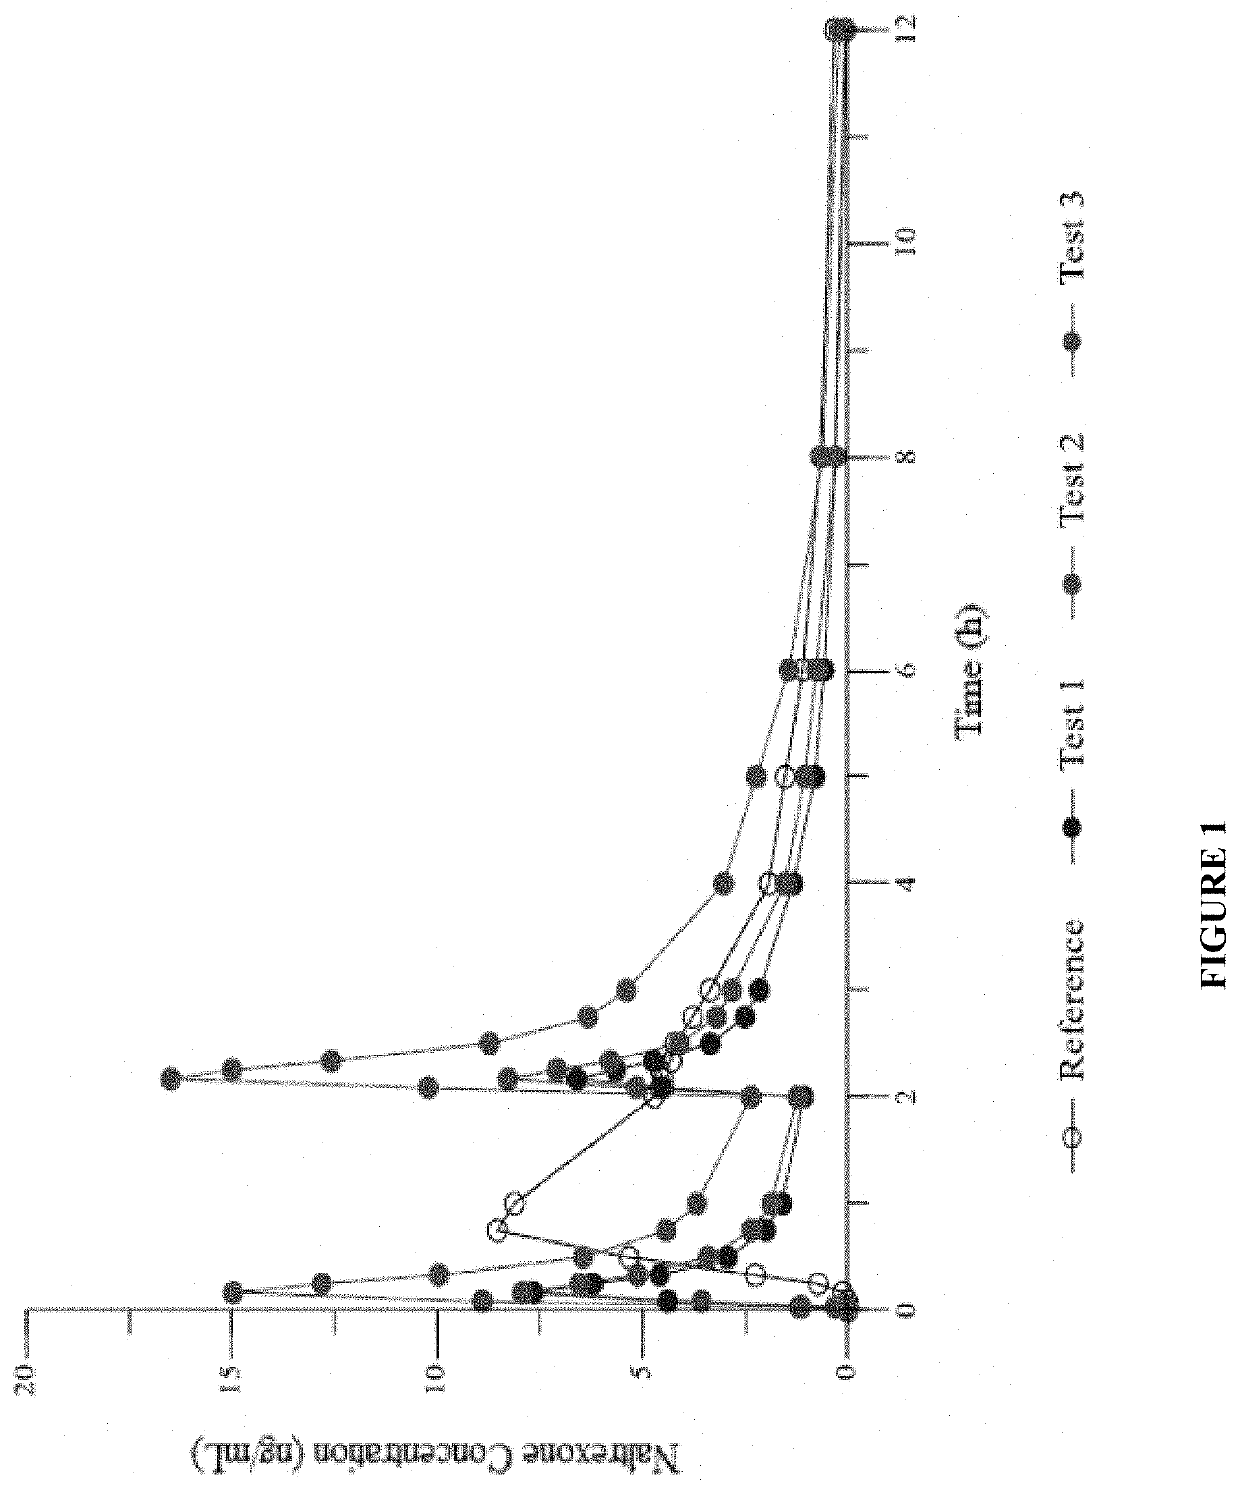 Compositions, devices, and methods for the treatment of overdose and reward-based disorders